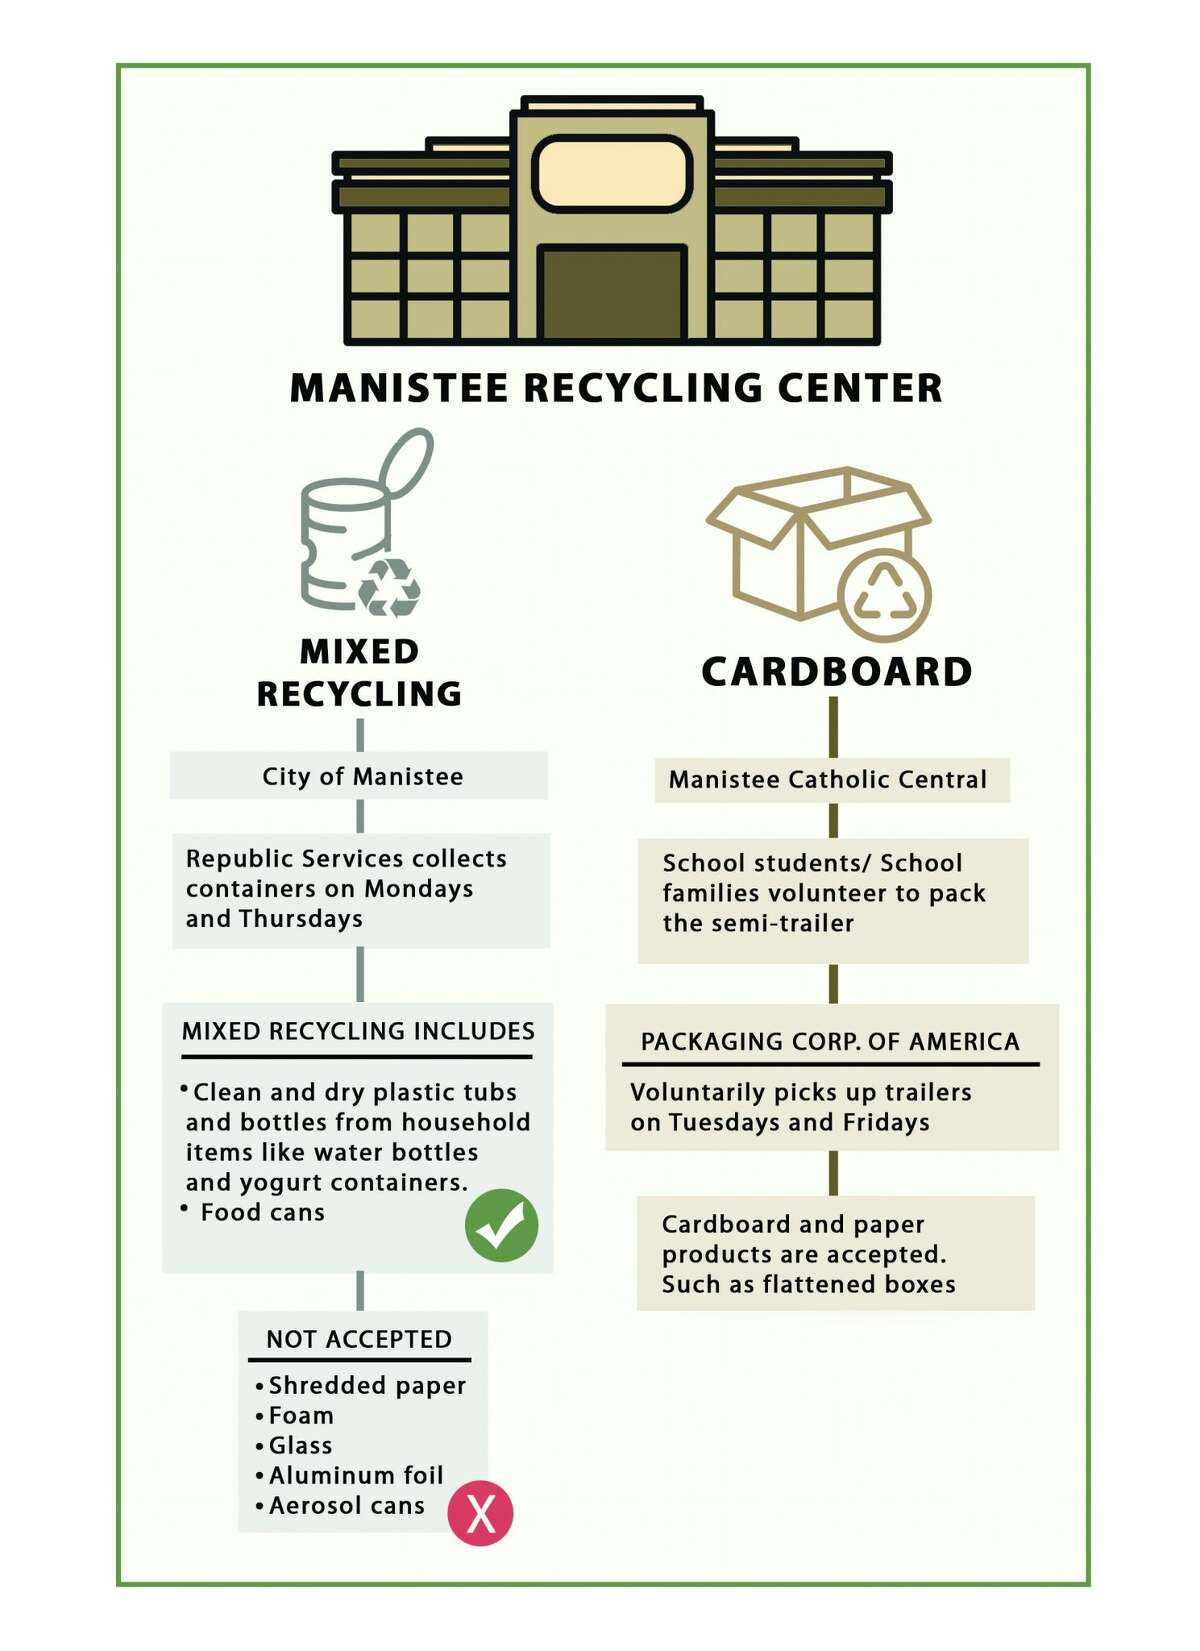 The Manistee Recycling Center features both a cardboard trailer and a mixed recyclables bin. Both aspects are managed by different entities and accept different items.